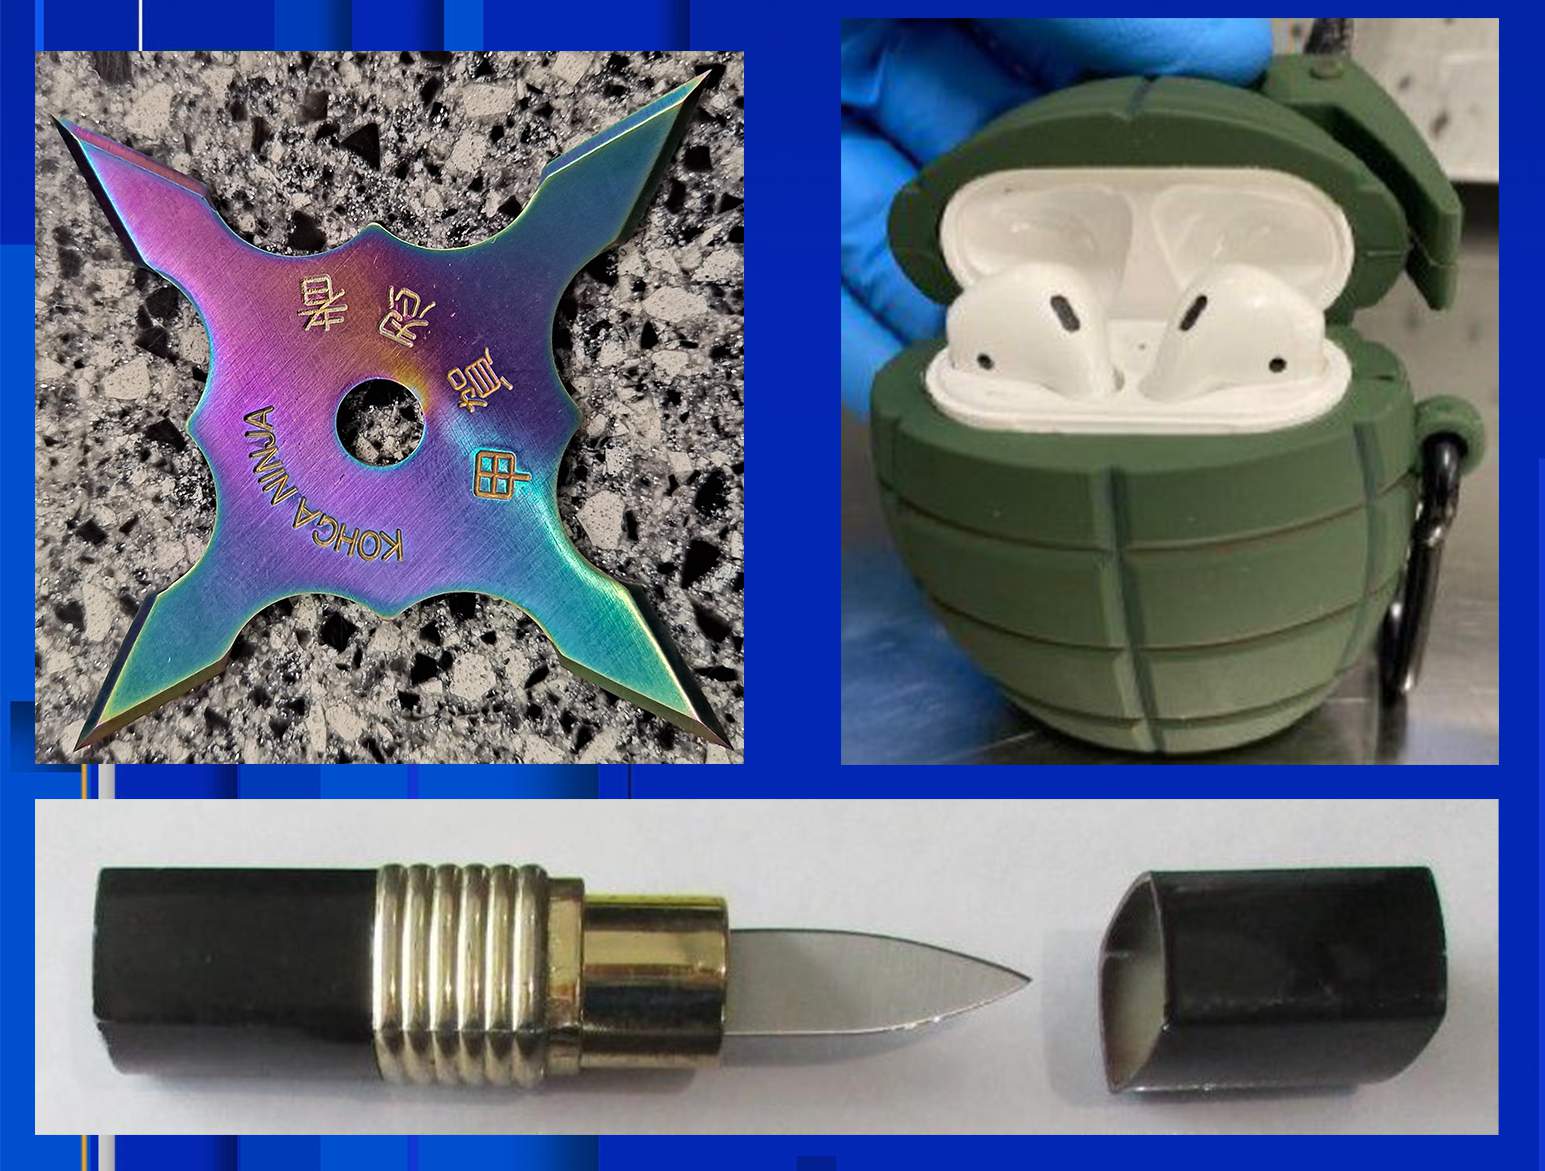 Photos: What TSA agents took from people at airports in 2020